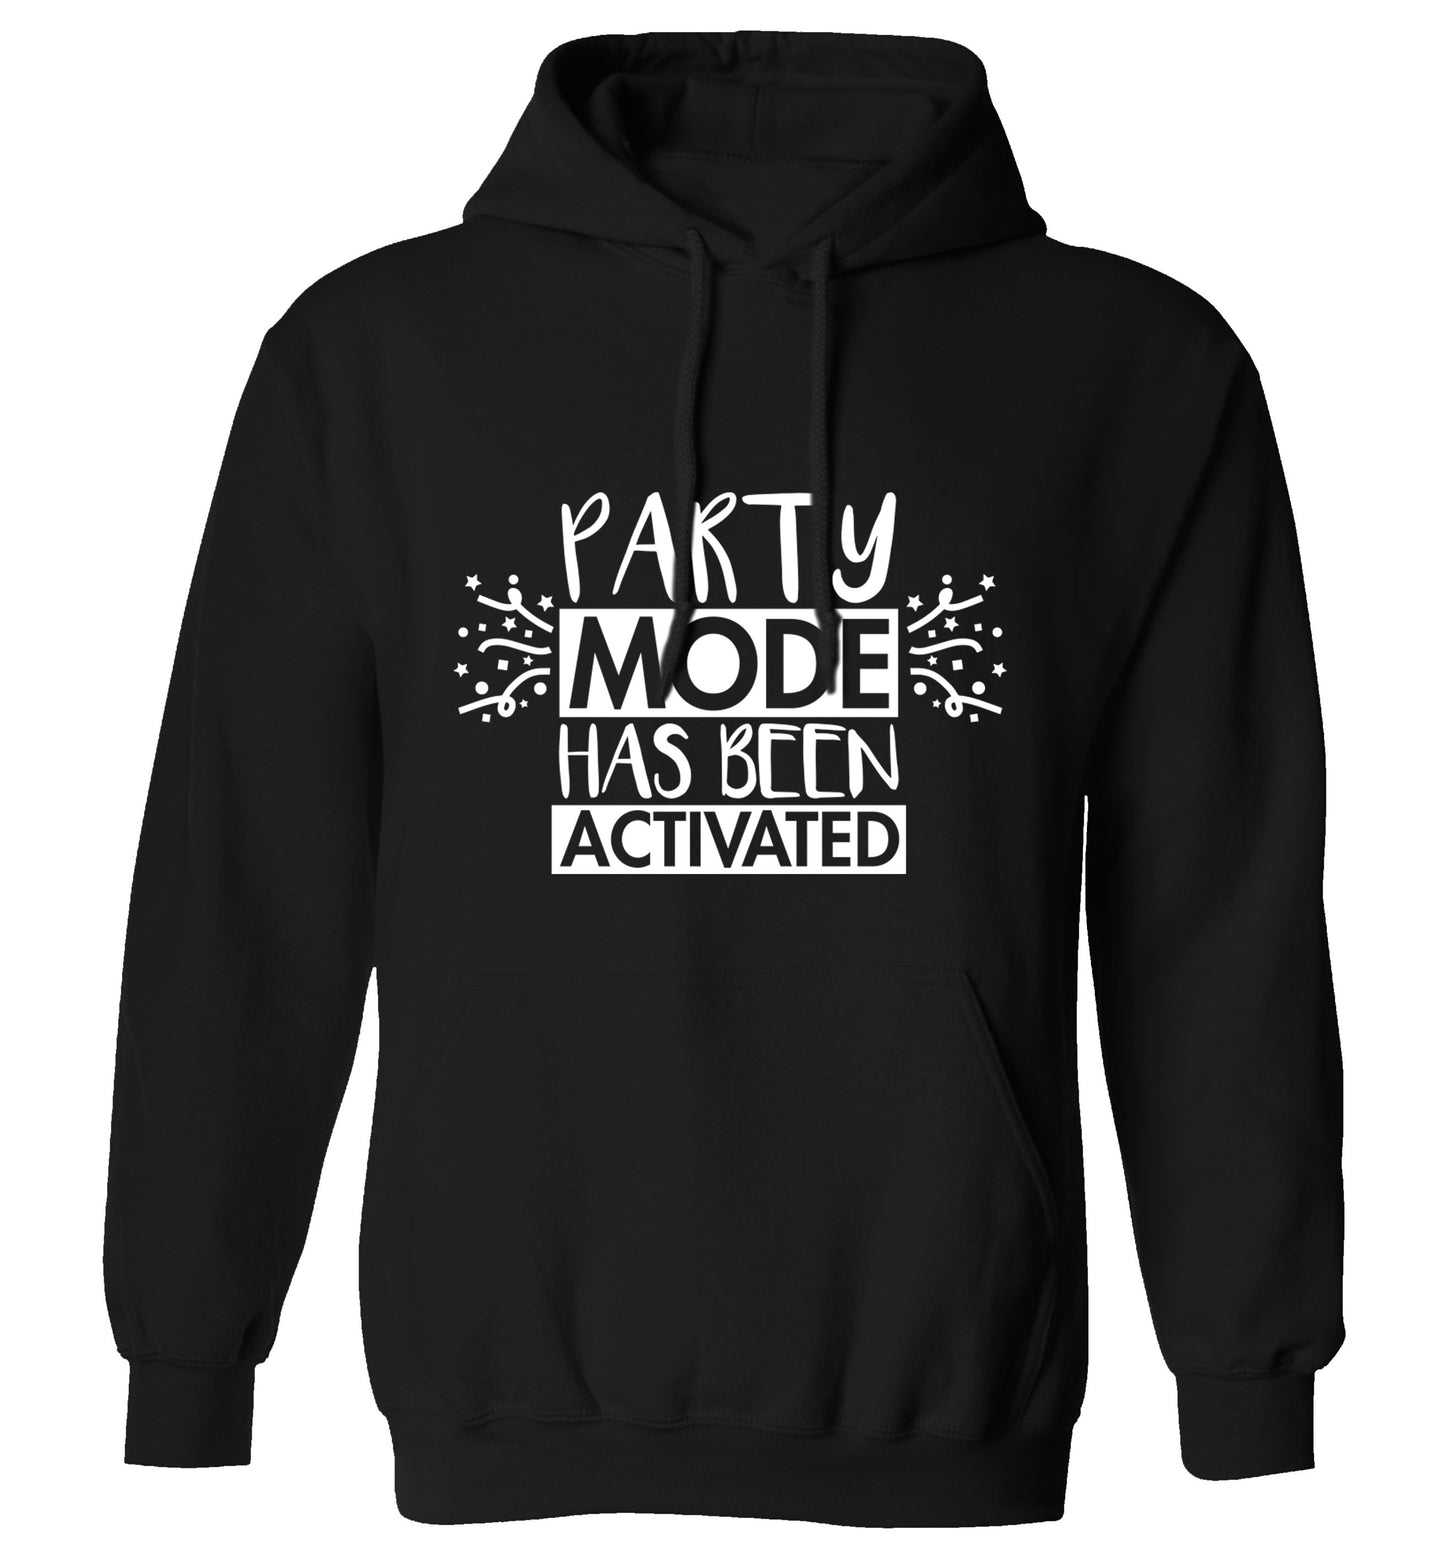 Please do not disturb party mode has been activated adults unisex black hoodie 2XL